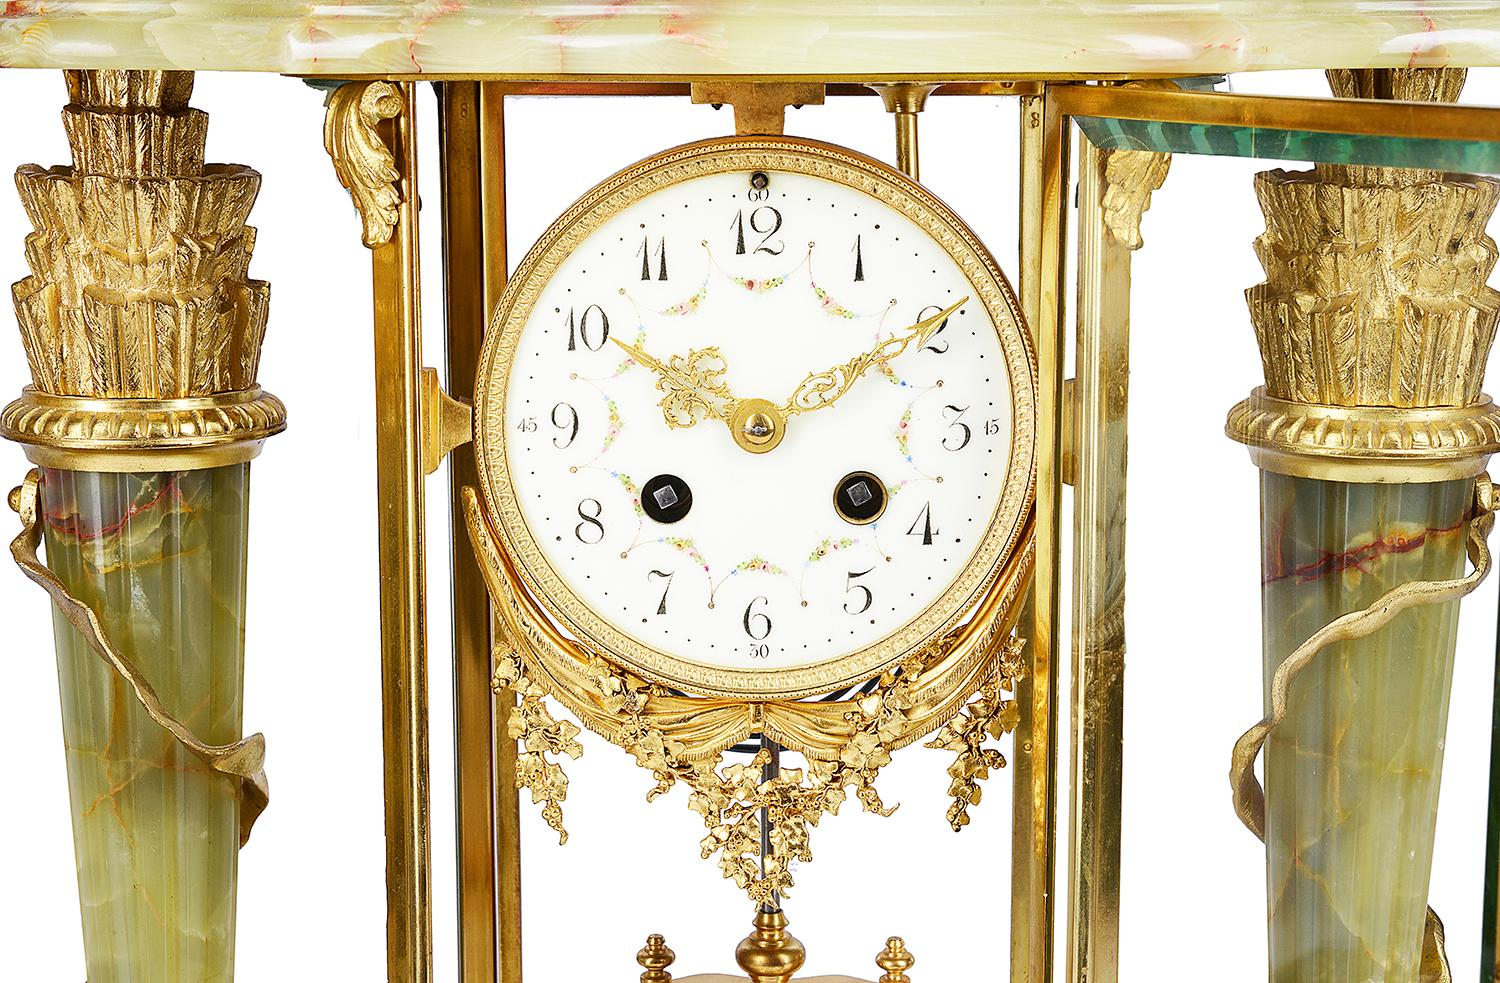 A good quality late 19th century French, onyx and gilded ormolu clock garniture. Having a pair of four branch candelabra on either side, each with arrow sheaths, the clock having an urn finial, a white enamel clock face, an eight day chiming